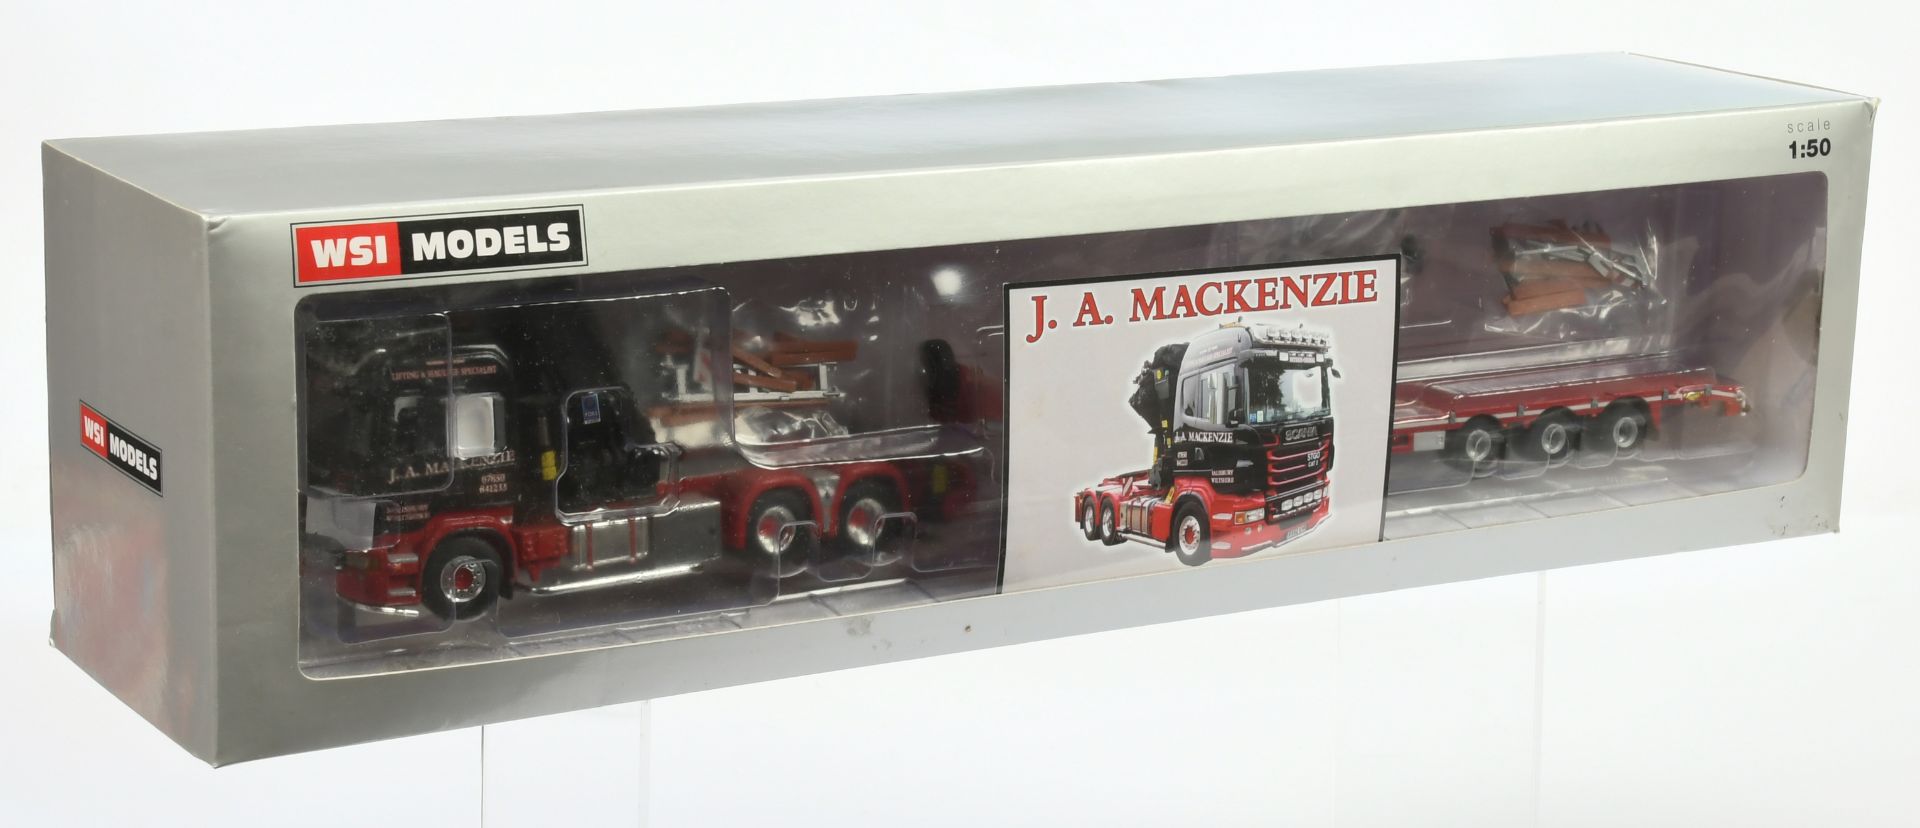 WSI Models (1/50th) 02-2155 Scania R6 Highline "J.A.Mac Kenzie" - Red, white and black with certi...